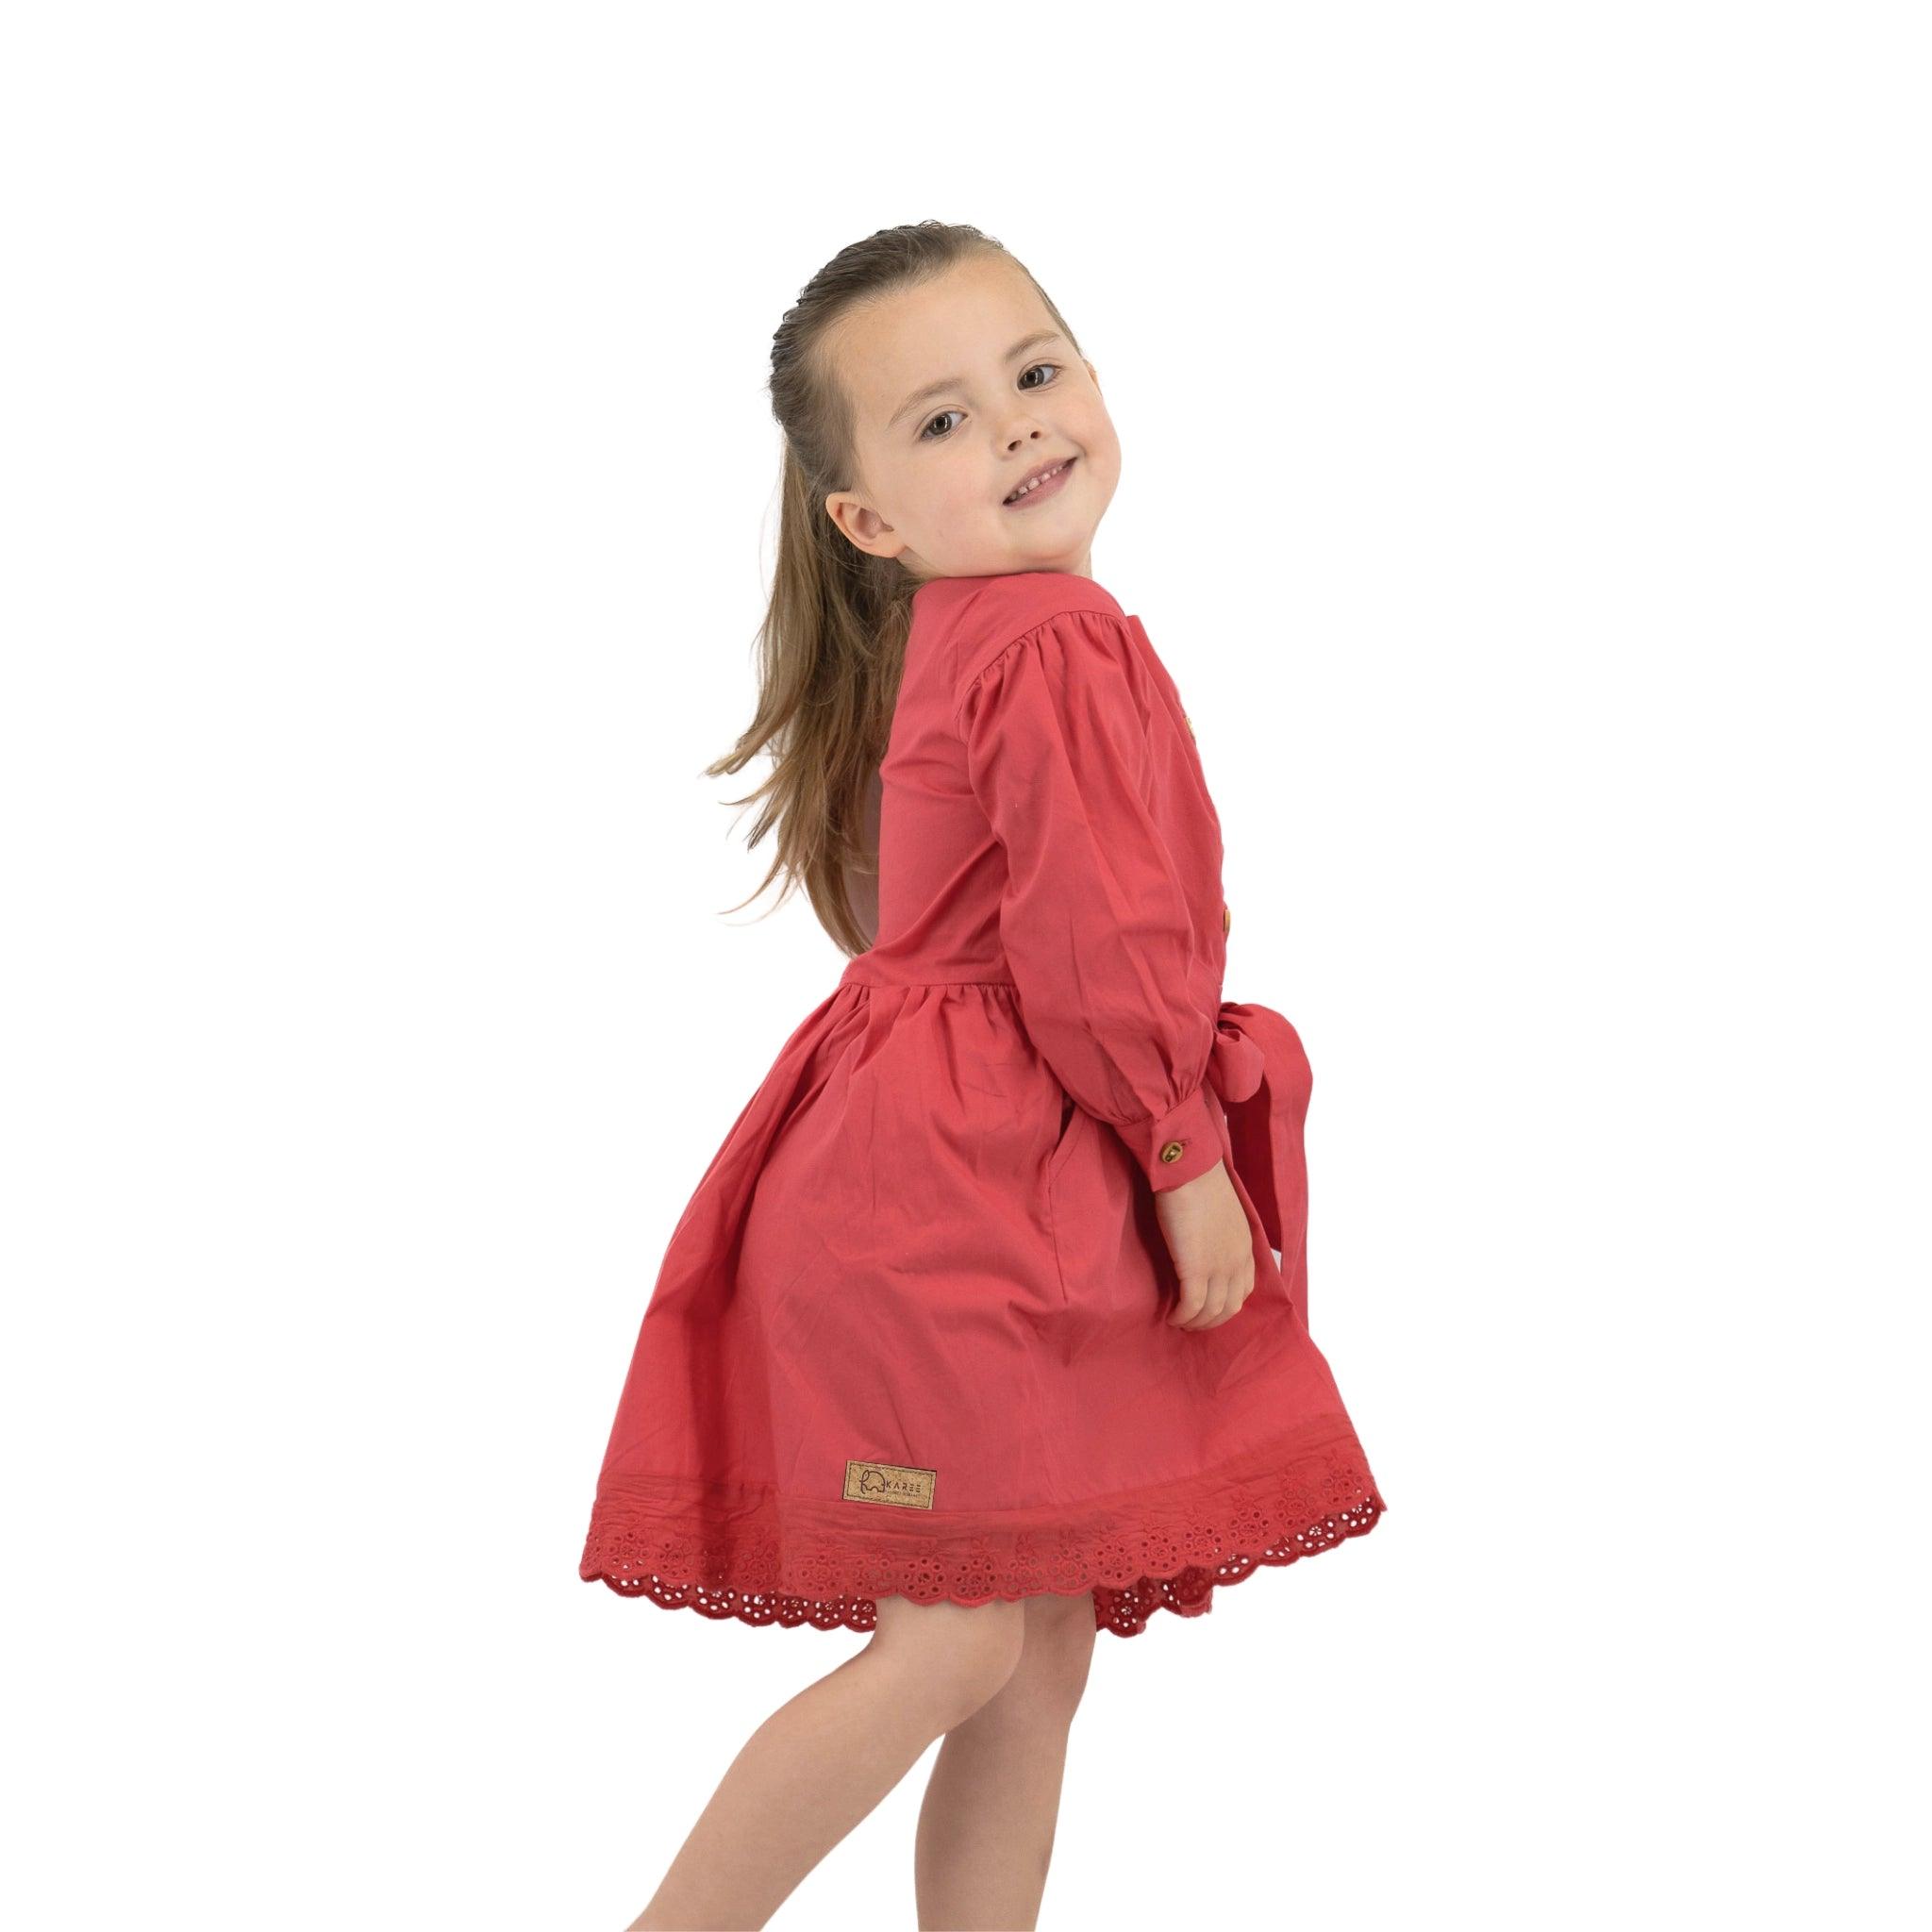 Young girl in a Karee red long puff sleeve cotton dress playfully twirling, looking over her shoulder with a smile, isolated on a white background.